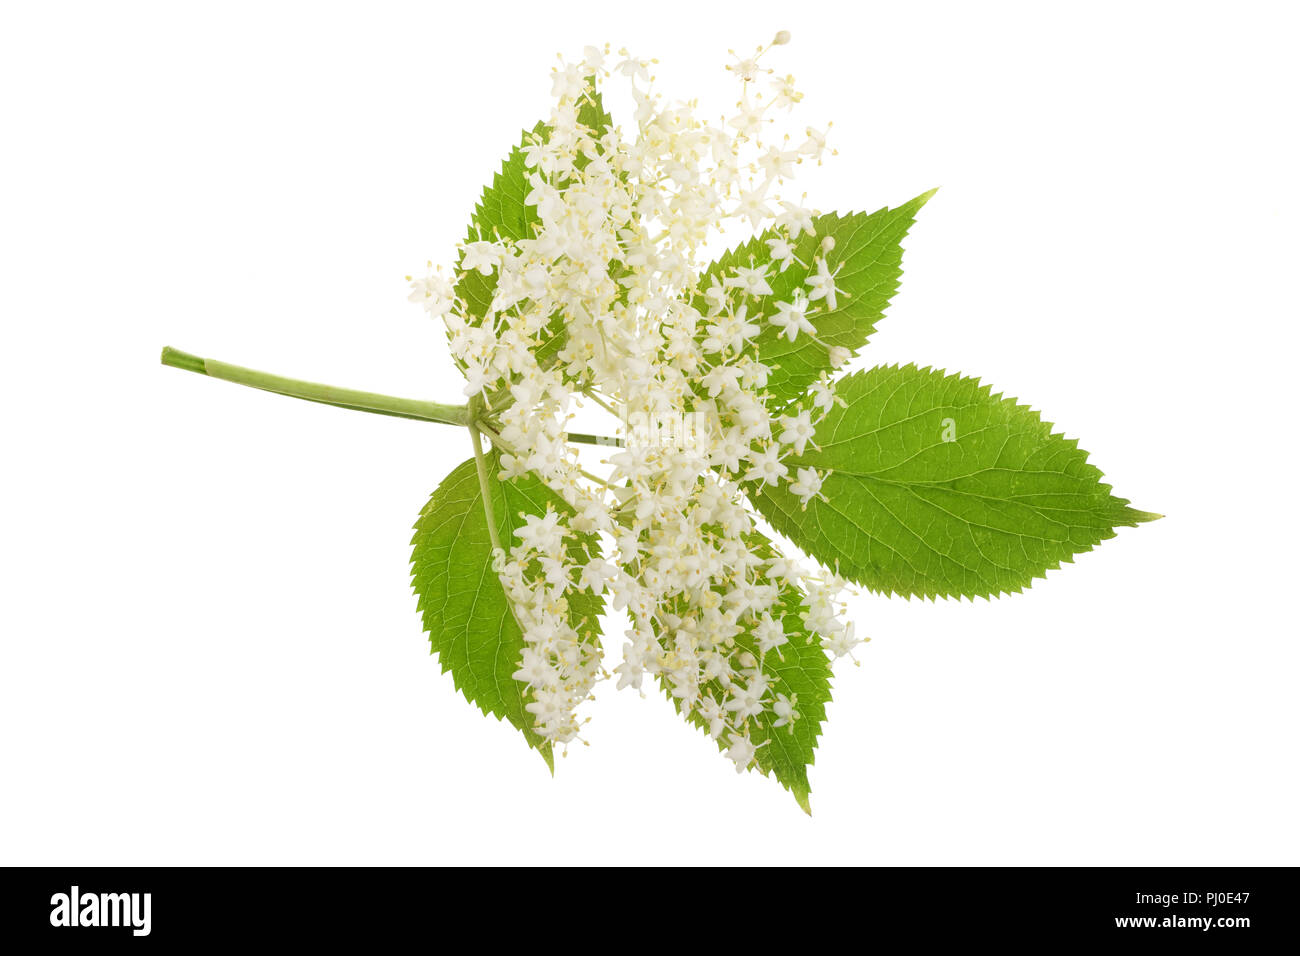 Elder flower blossoms isolated on a white background. Medicinal plant Stock Photo